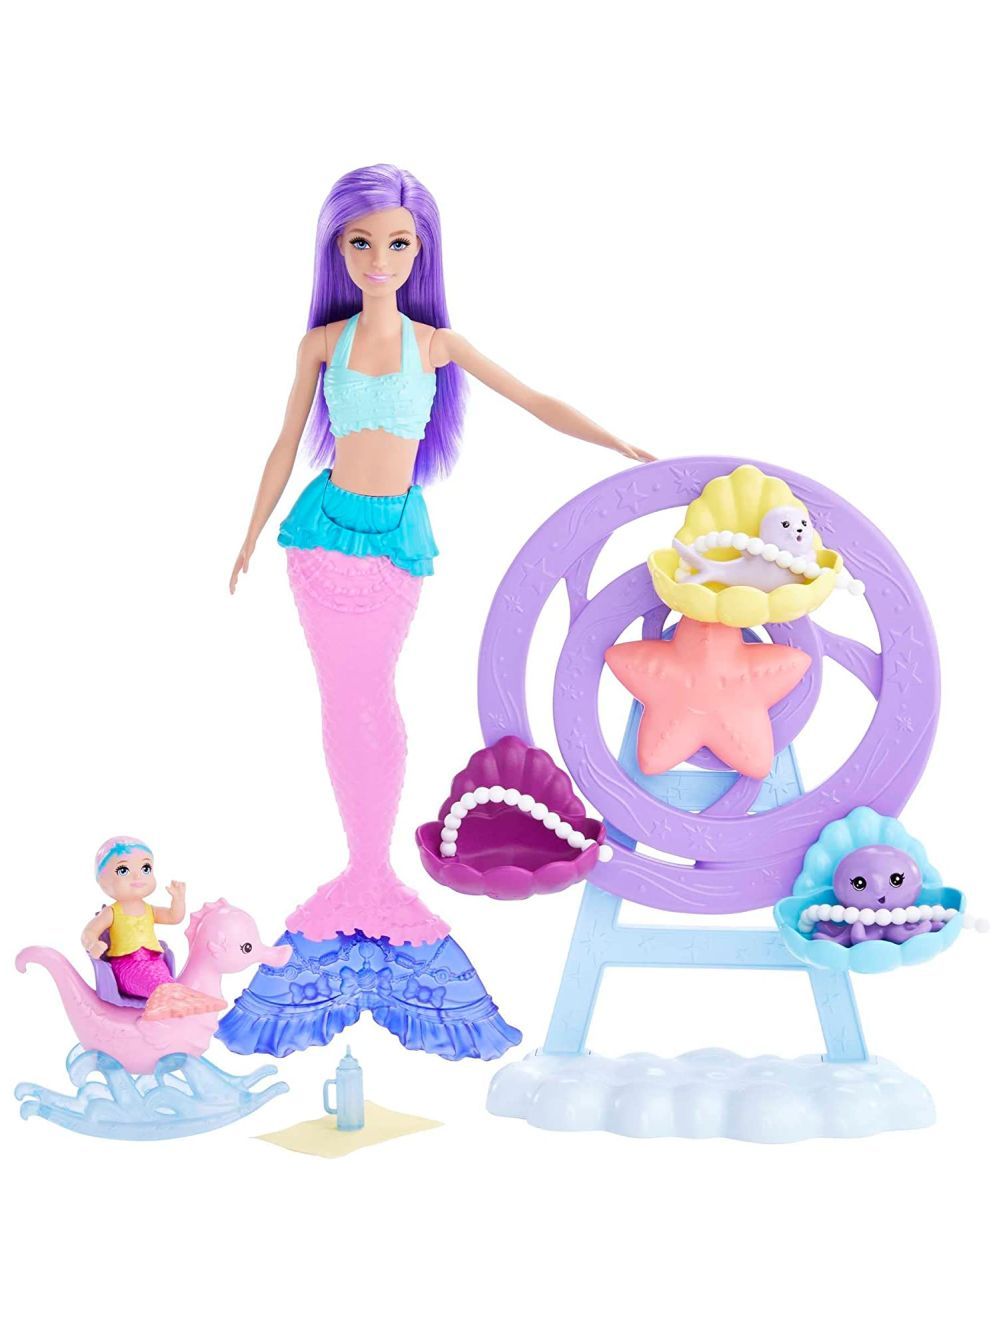 Barbie Dreamtopia Fairytale Mermaid Doll and Mermaid Baby Nursery Playset  with Baby Animals and Accessories for Girls 3 years up